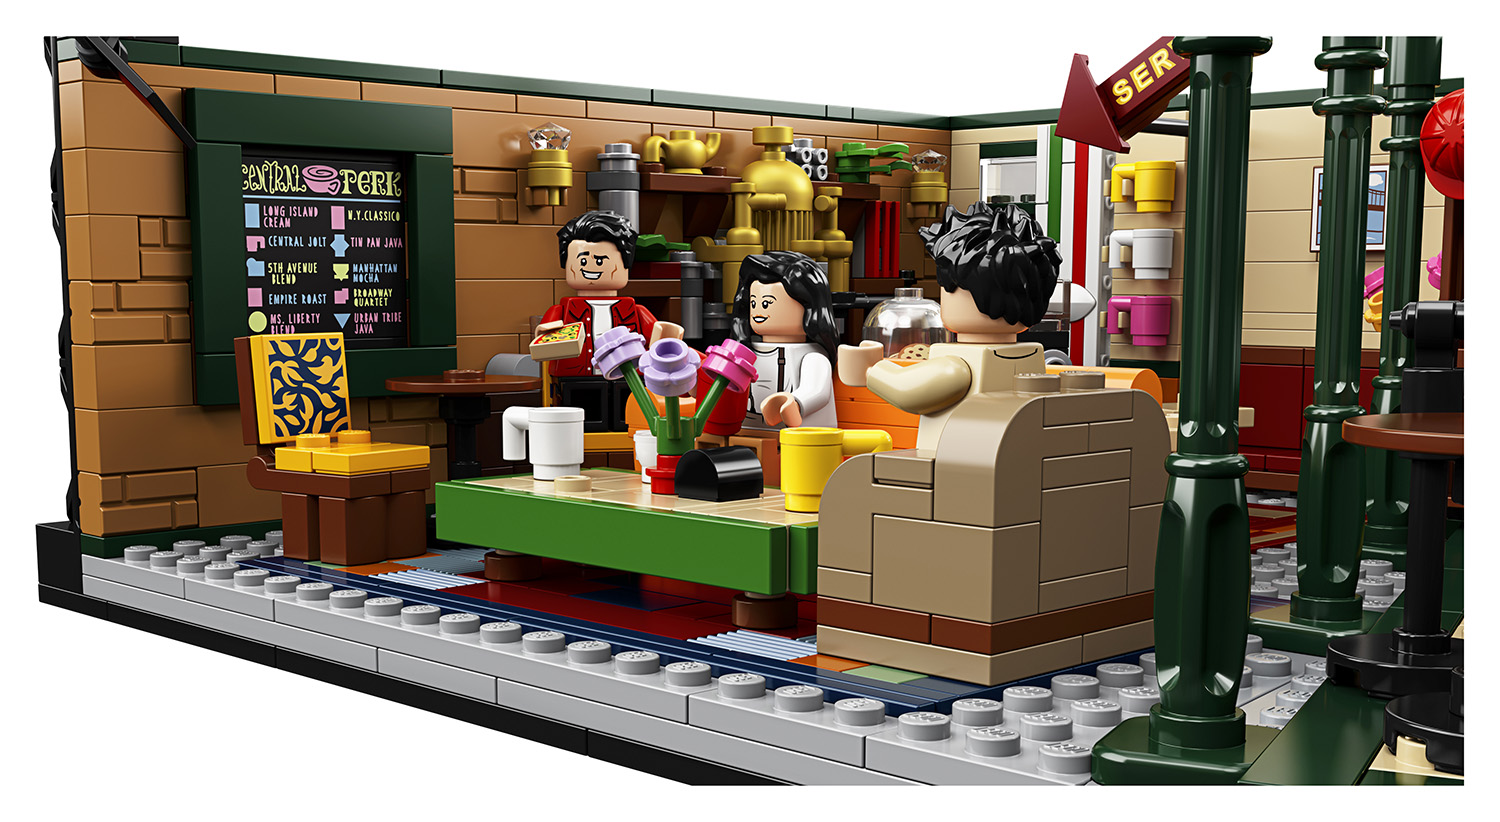 LEGO IDEAS - The Central Perk Coffee of Friends